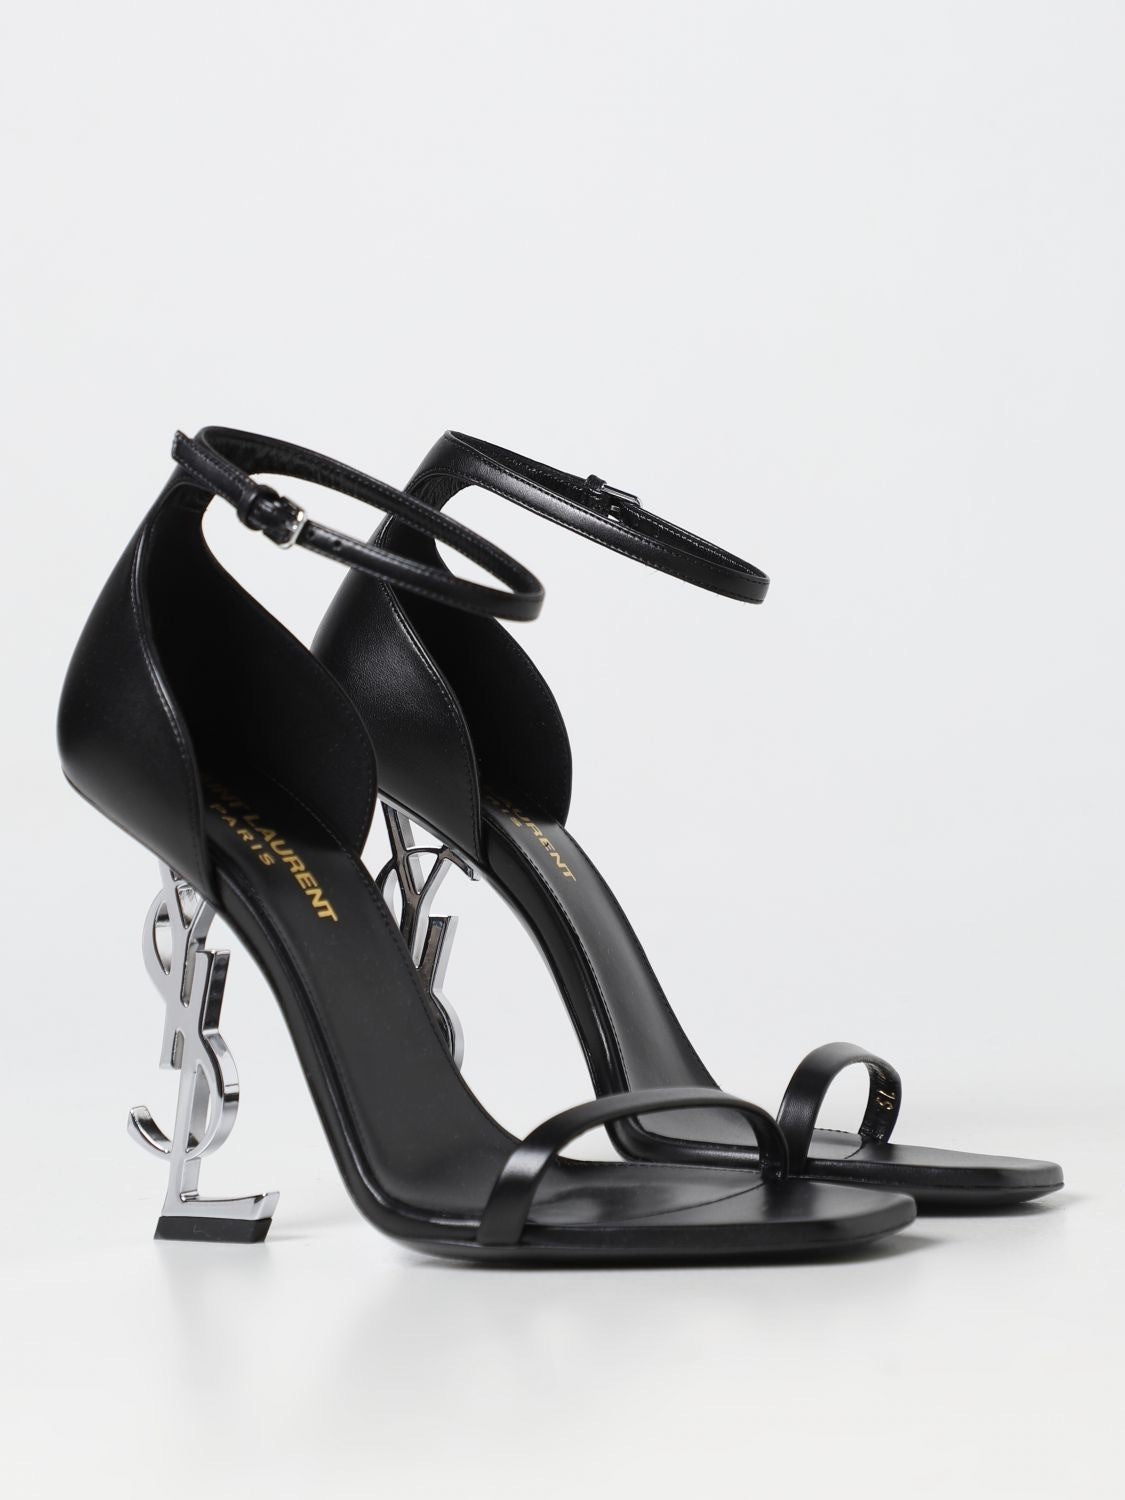 SAINT LAURENT OPYUM 110mm SANDALS IN SMOOTH LEATHER SILVER 557662AAABN1000 Authentic tại BlankRoom Việt Nam